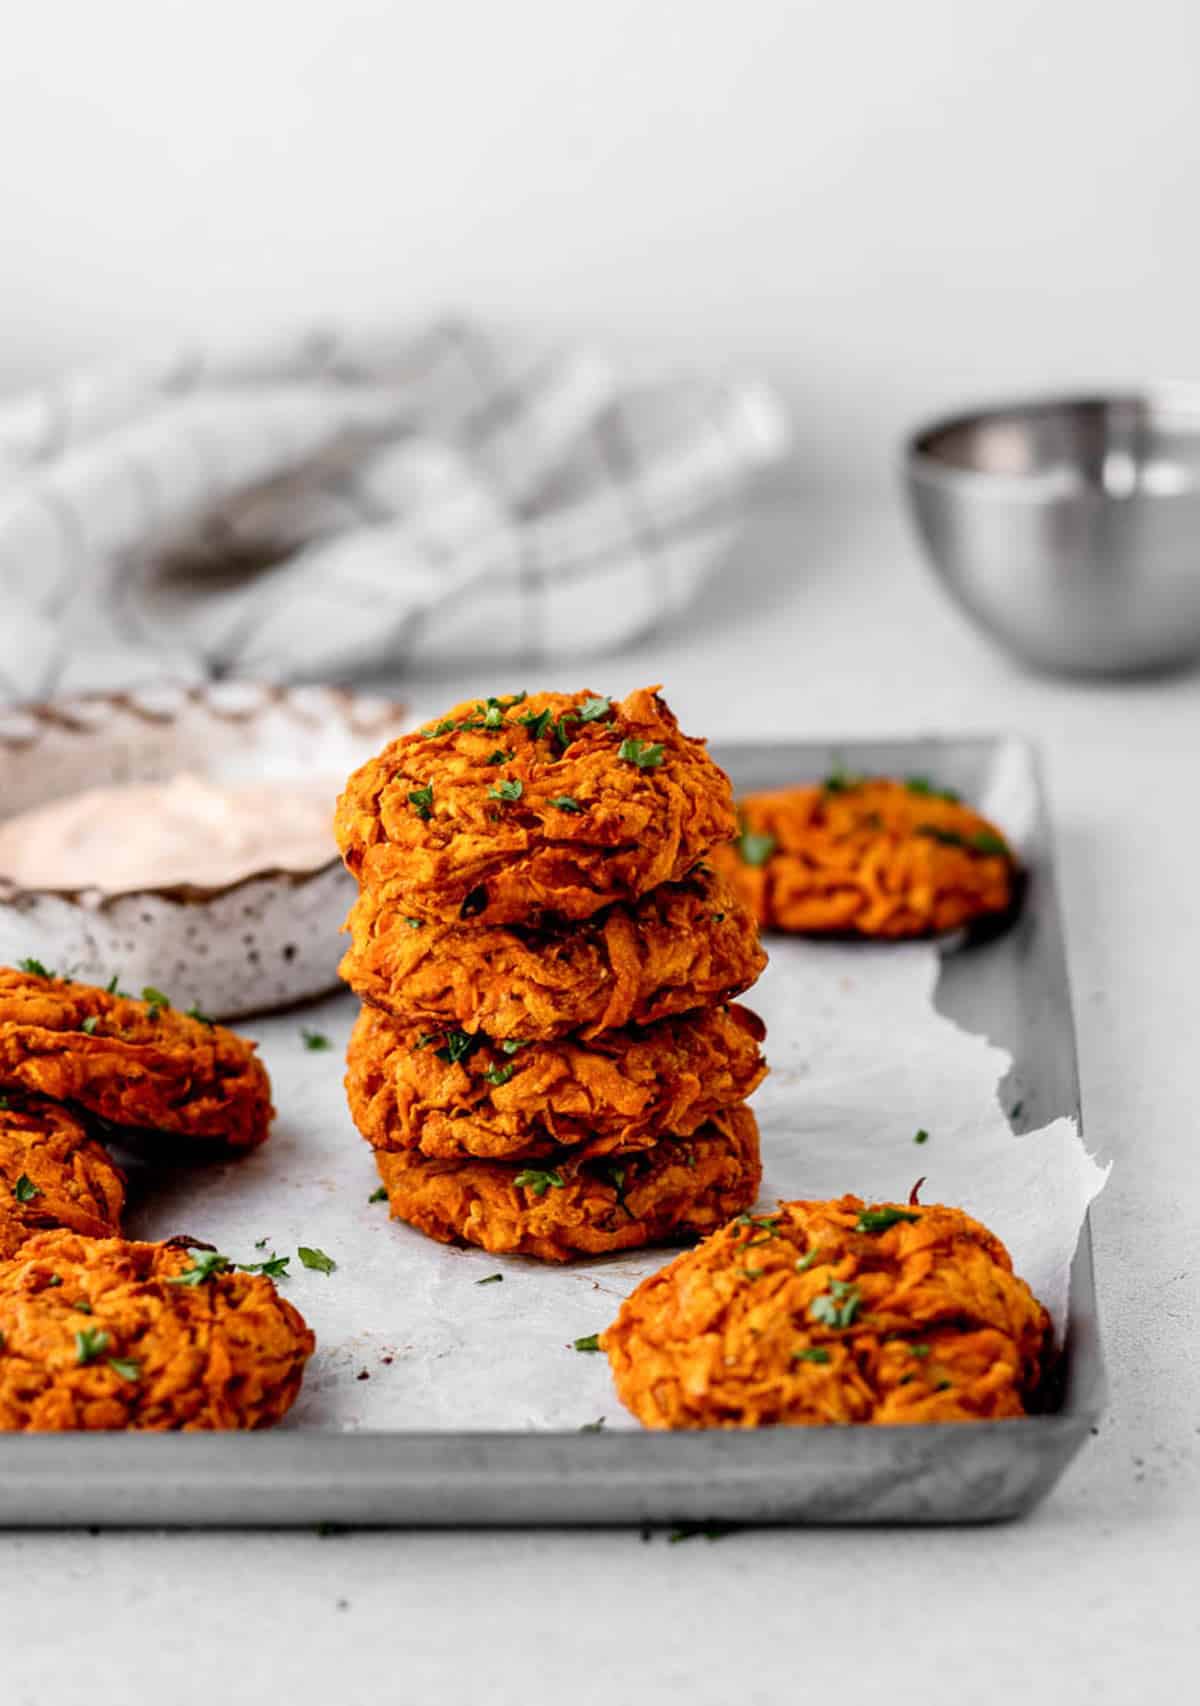 A stack of baked sweet potato fritters on a baking sheet with other fritters around it.